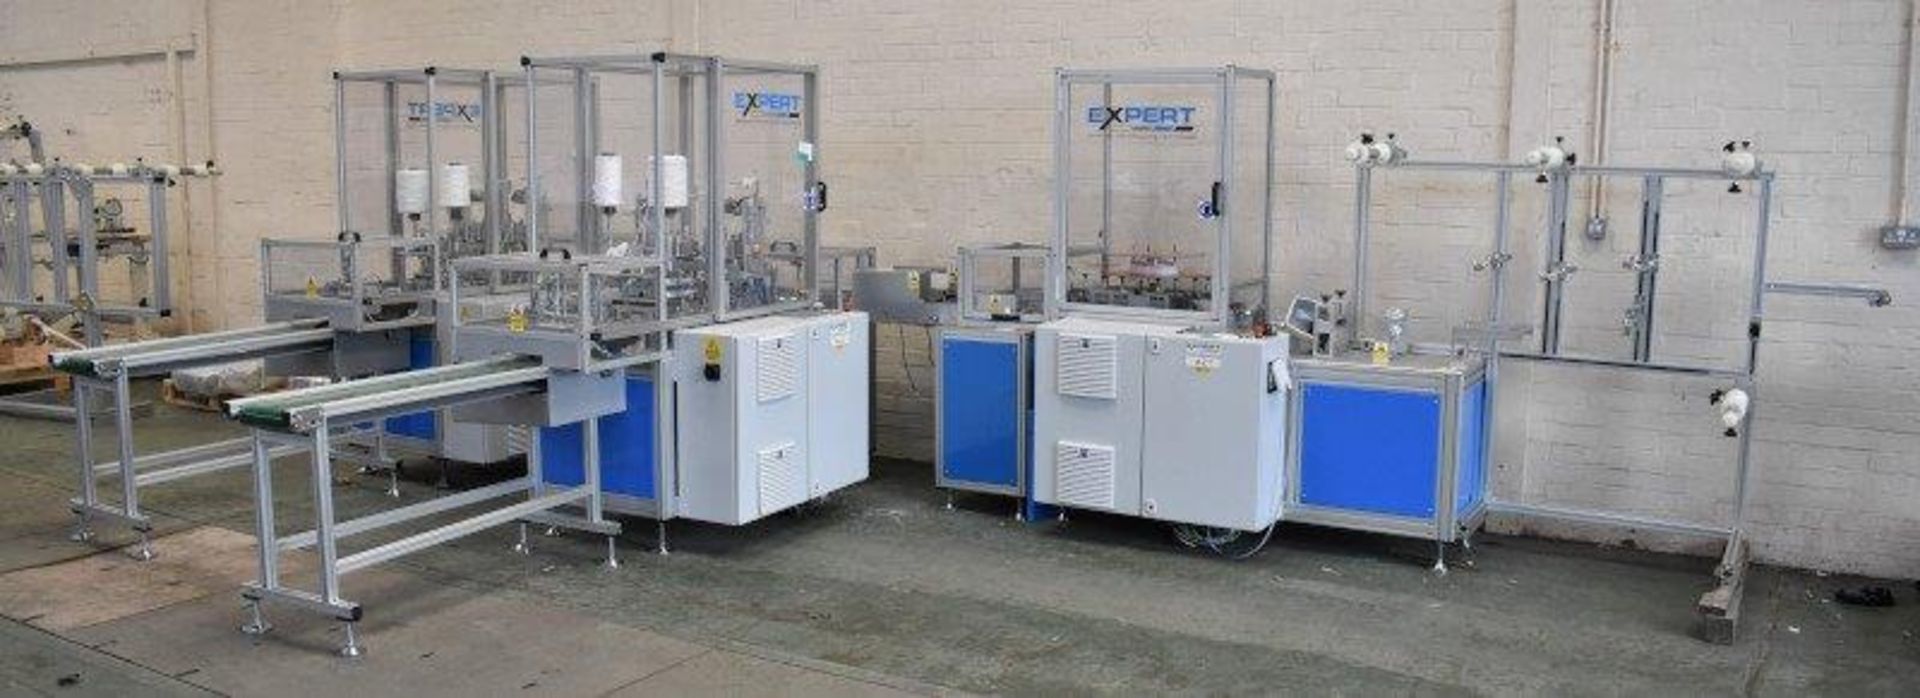 Expert fully automated Mask Making Machine - manufactured in 2020. - Image 2 of 20